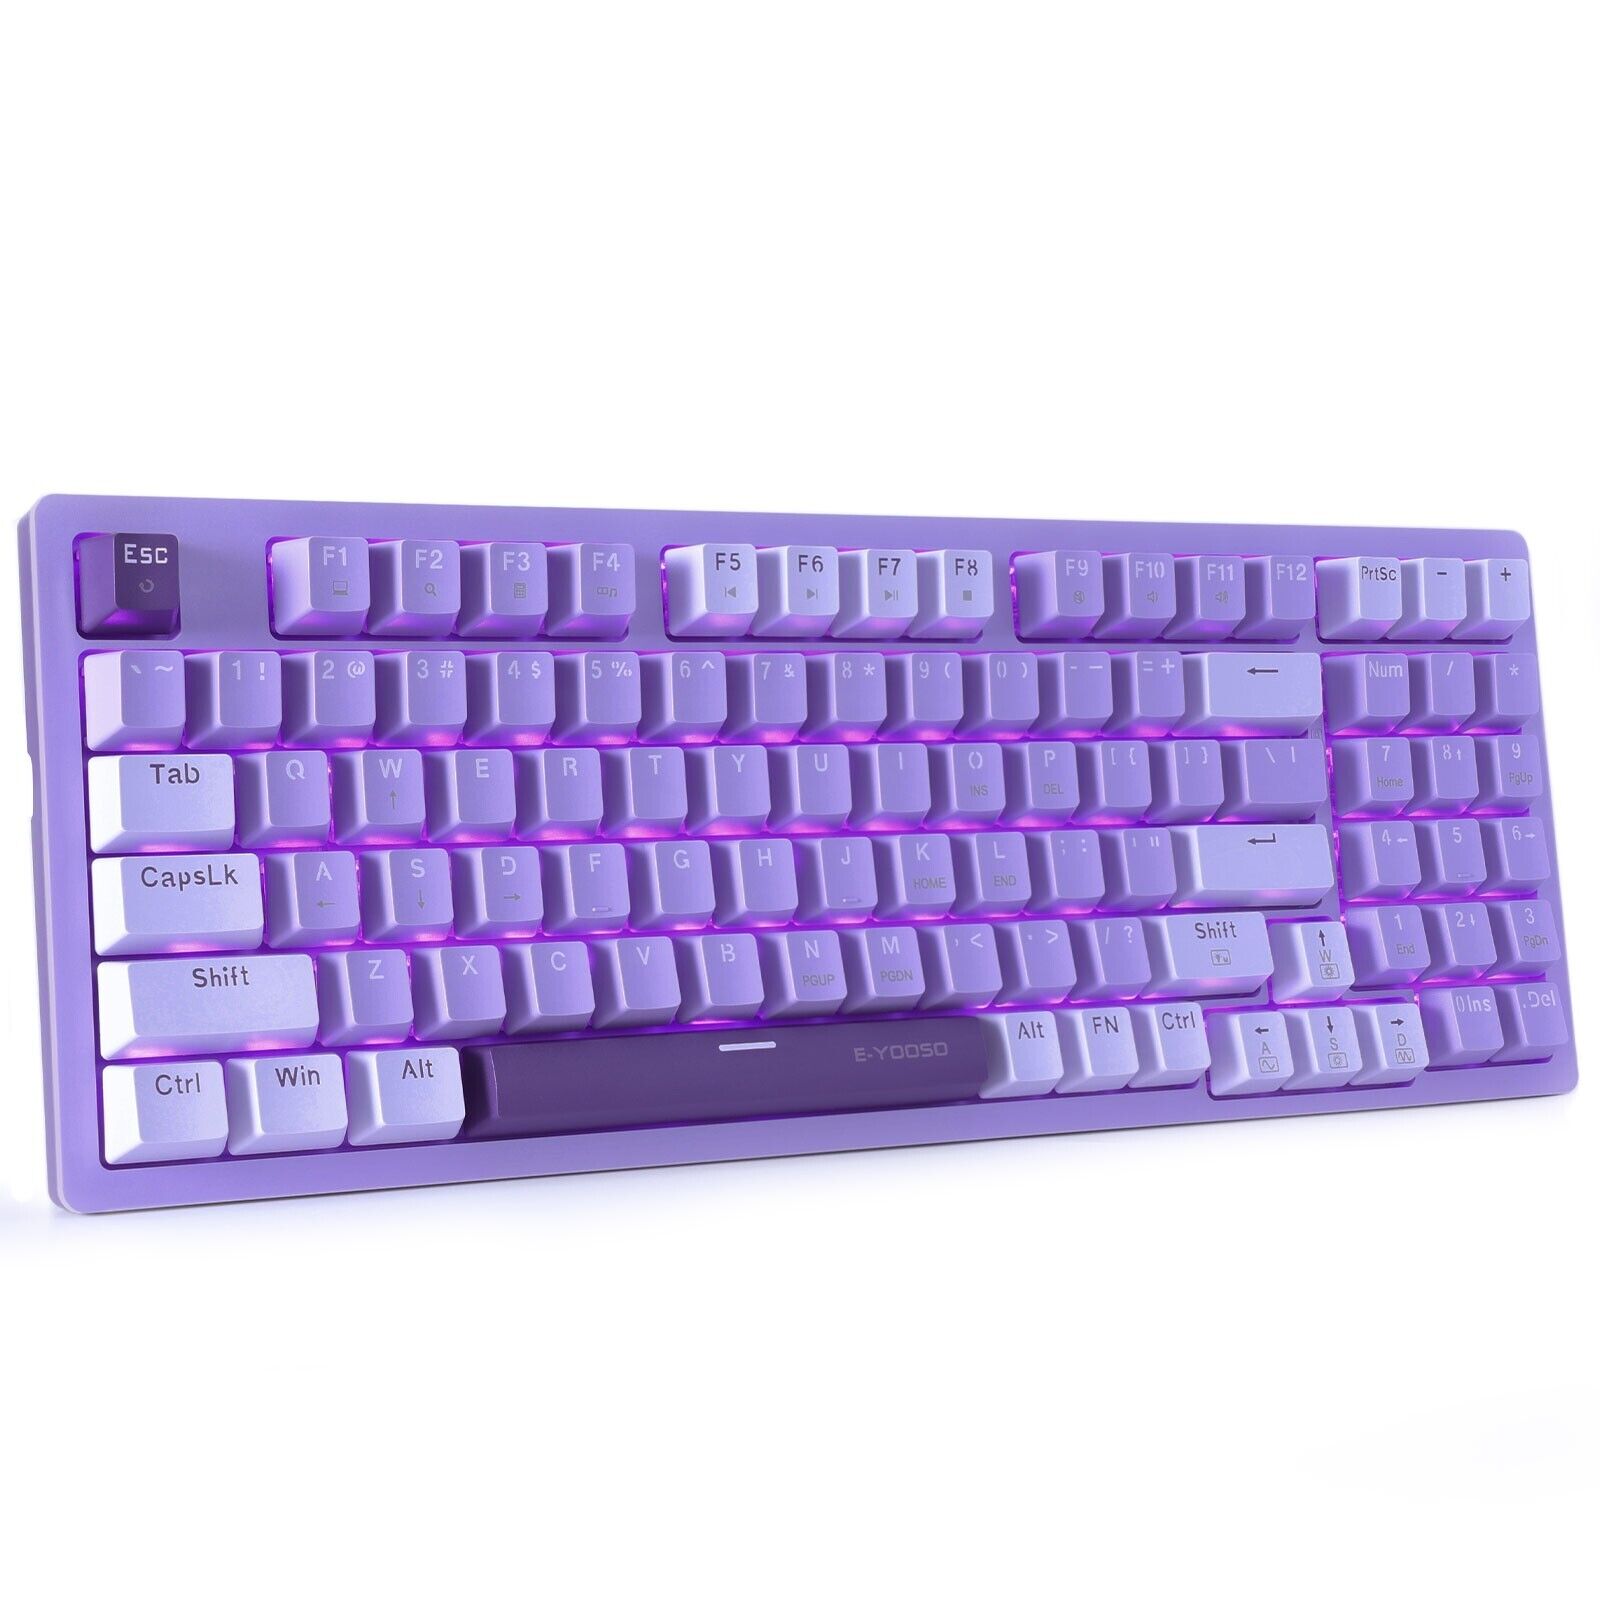 E-YOOSO Mechanical Wired keyboard,Purple Led Backlit,Red Switch for PC/Laptop